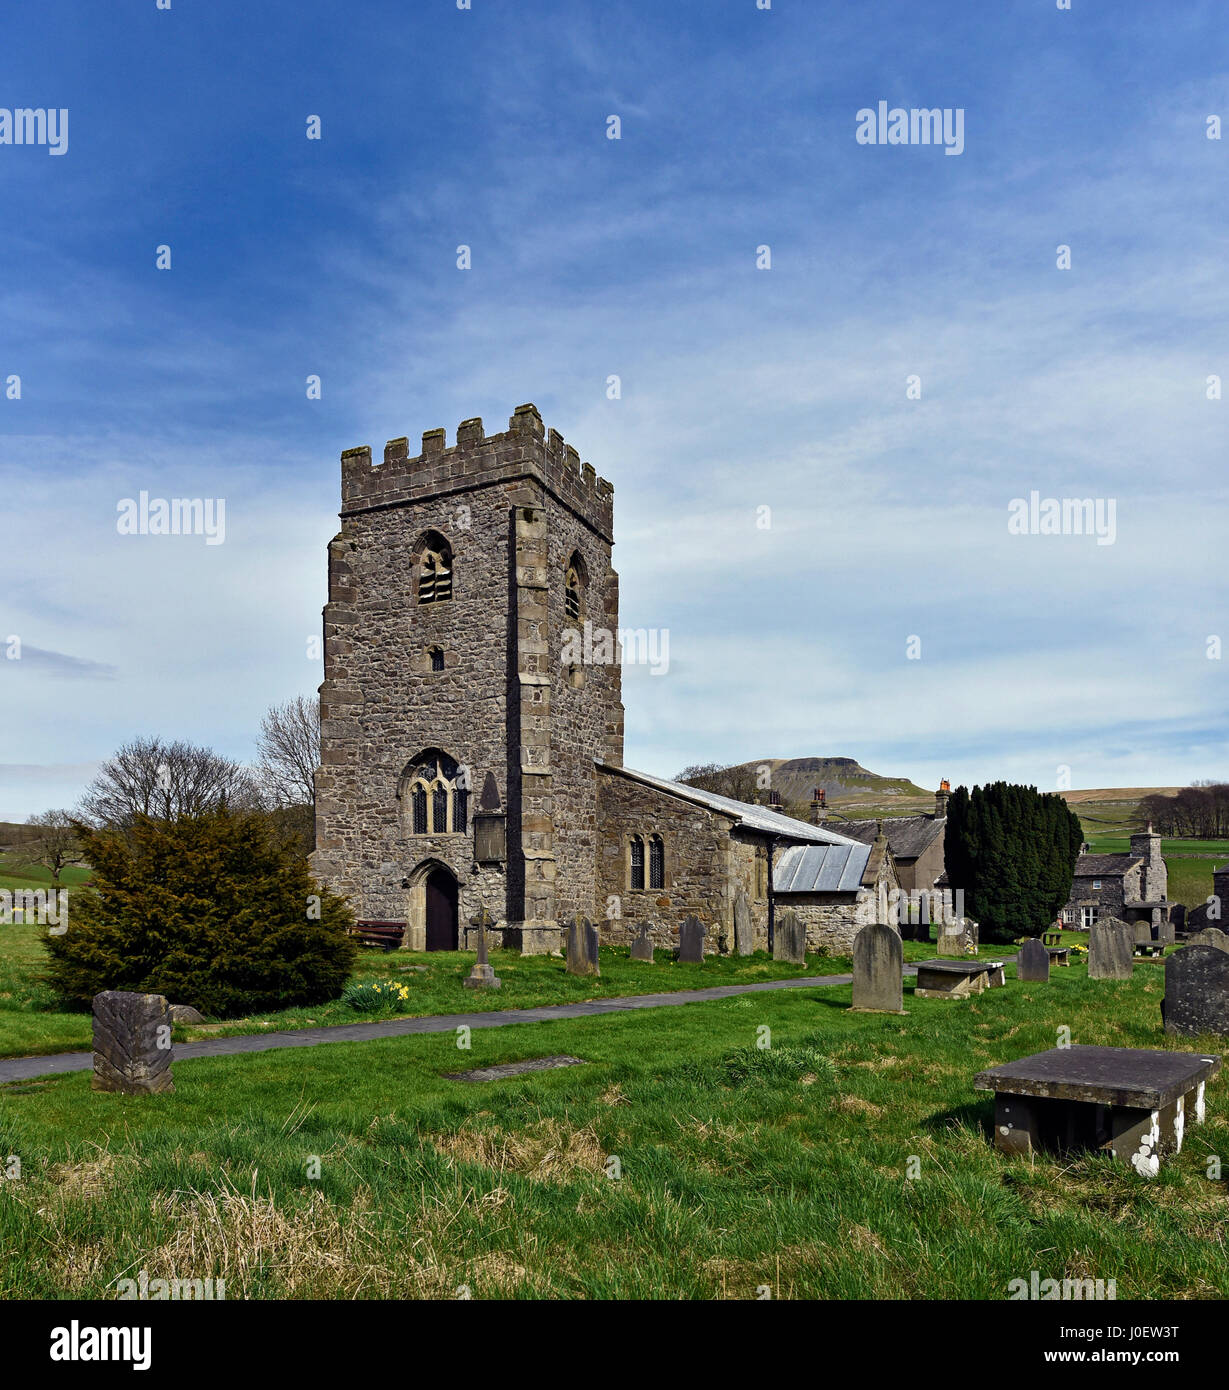 Church of Saint Oswald. Horton-in-Ribblesdale, Craven, North Yorkshire, England, United Kingdom, Europe. Stock Photo